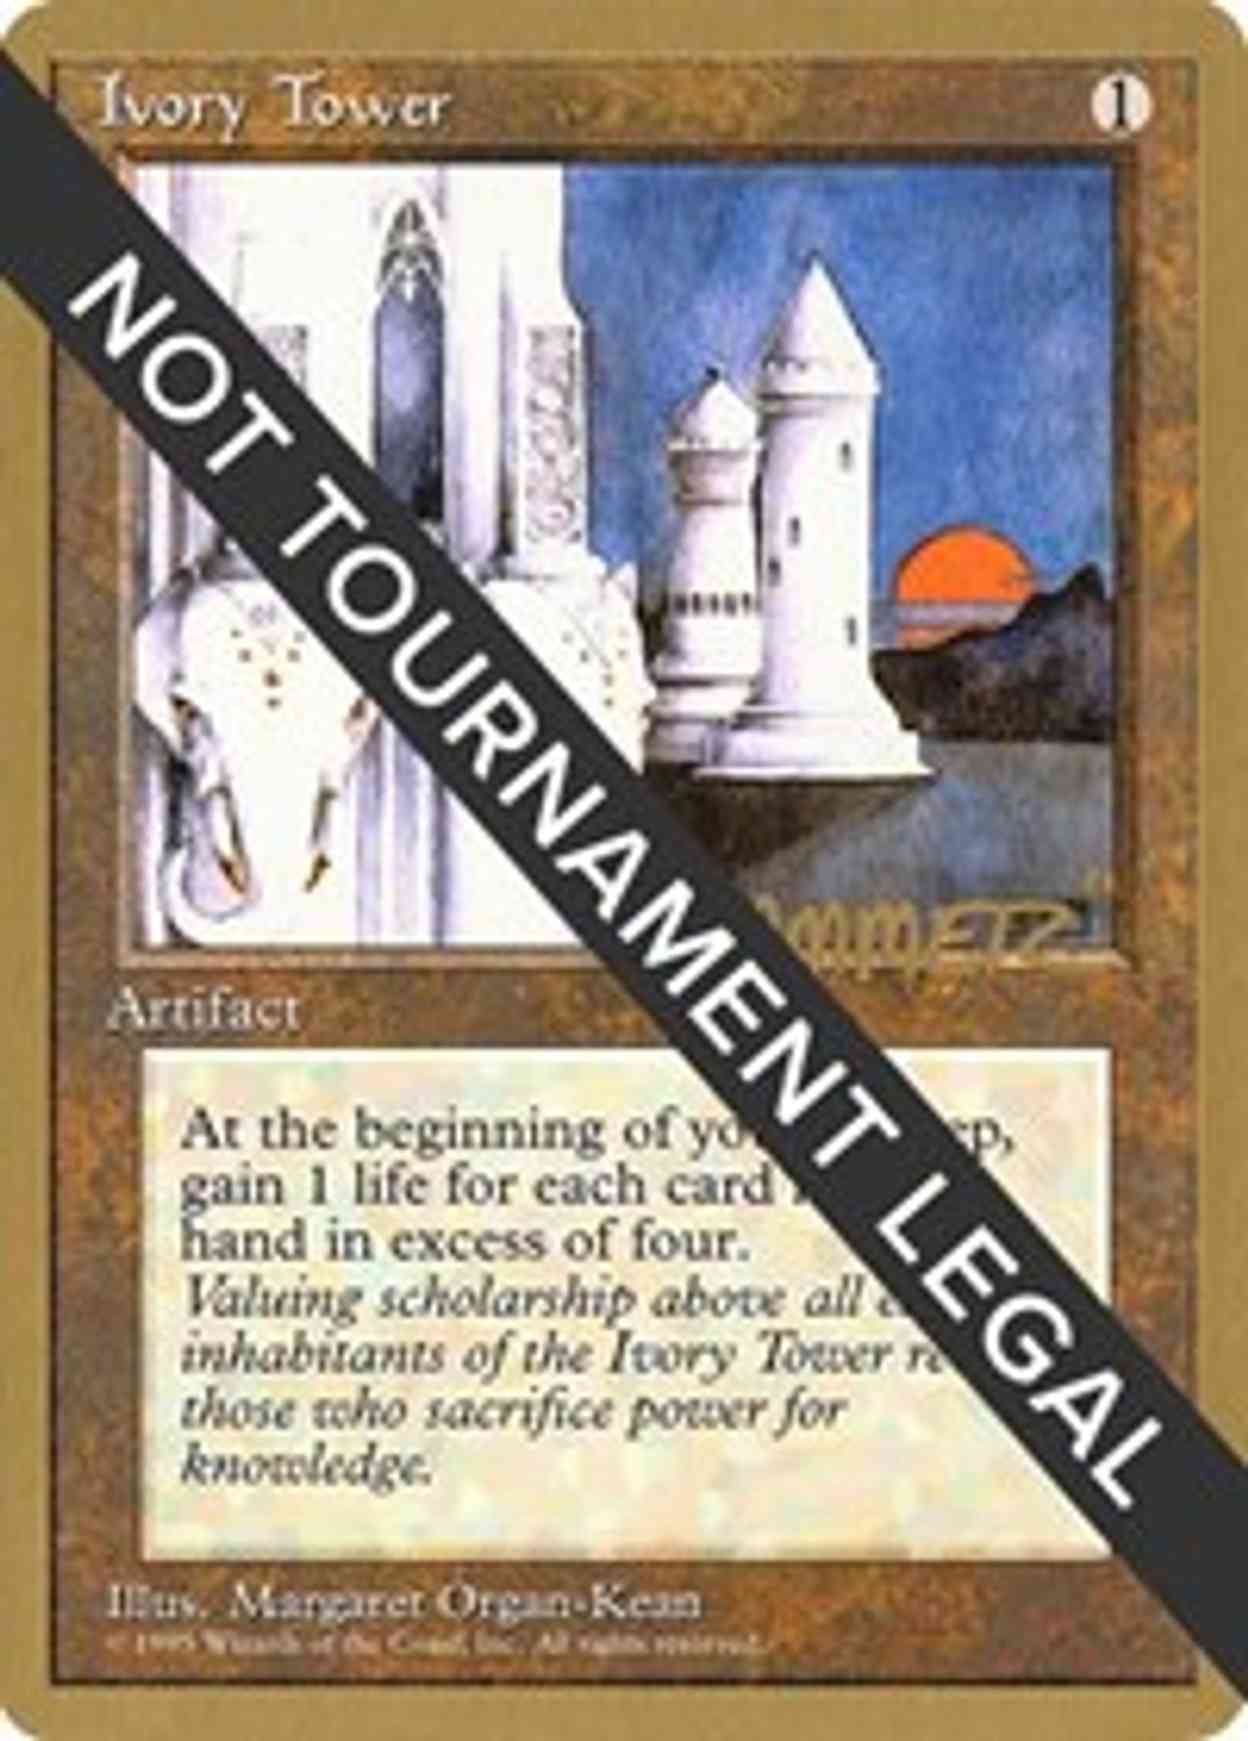 Ivory Tower - 1996 Shawn "Hammer" Regnier (4ED) magic card front